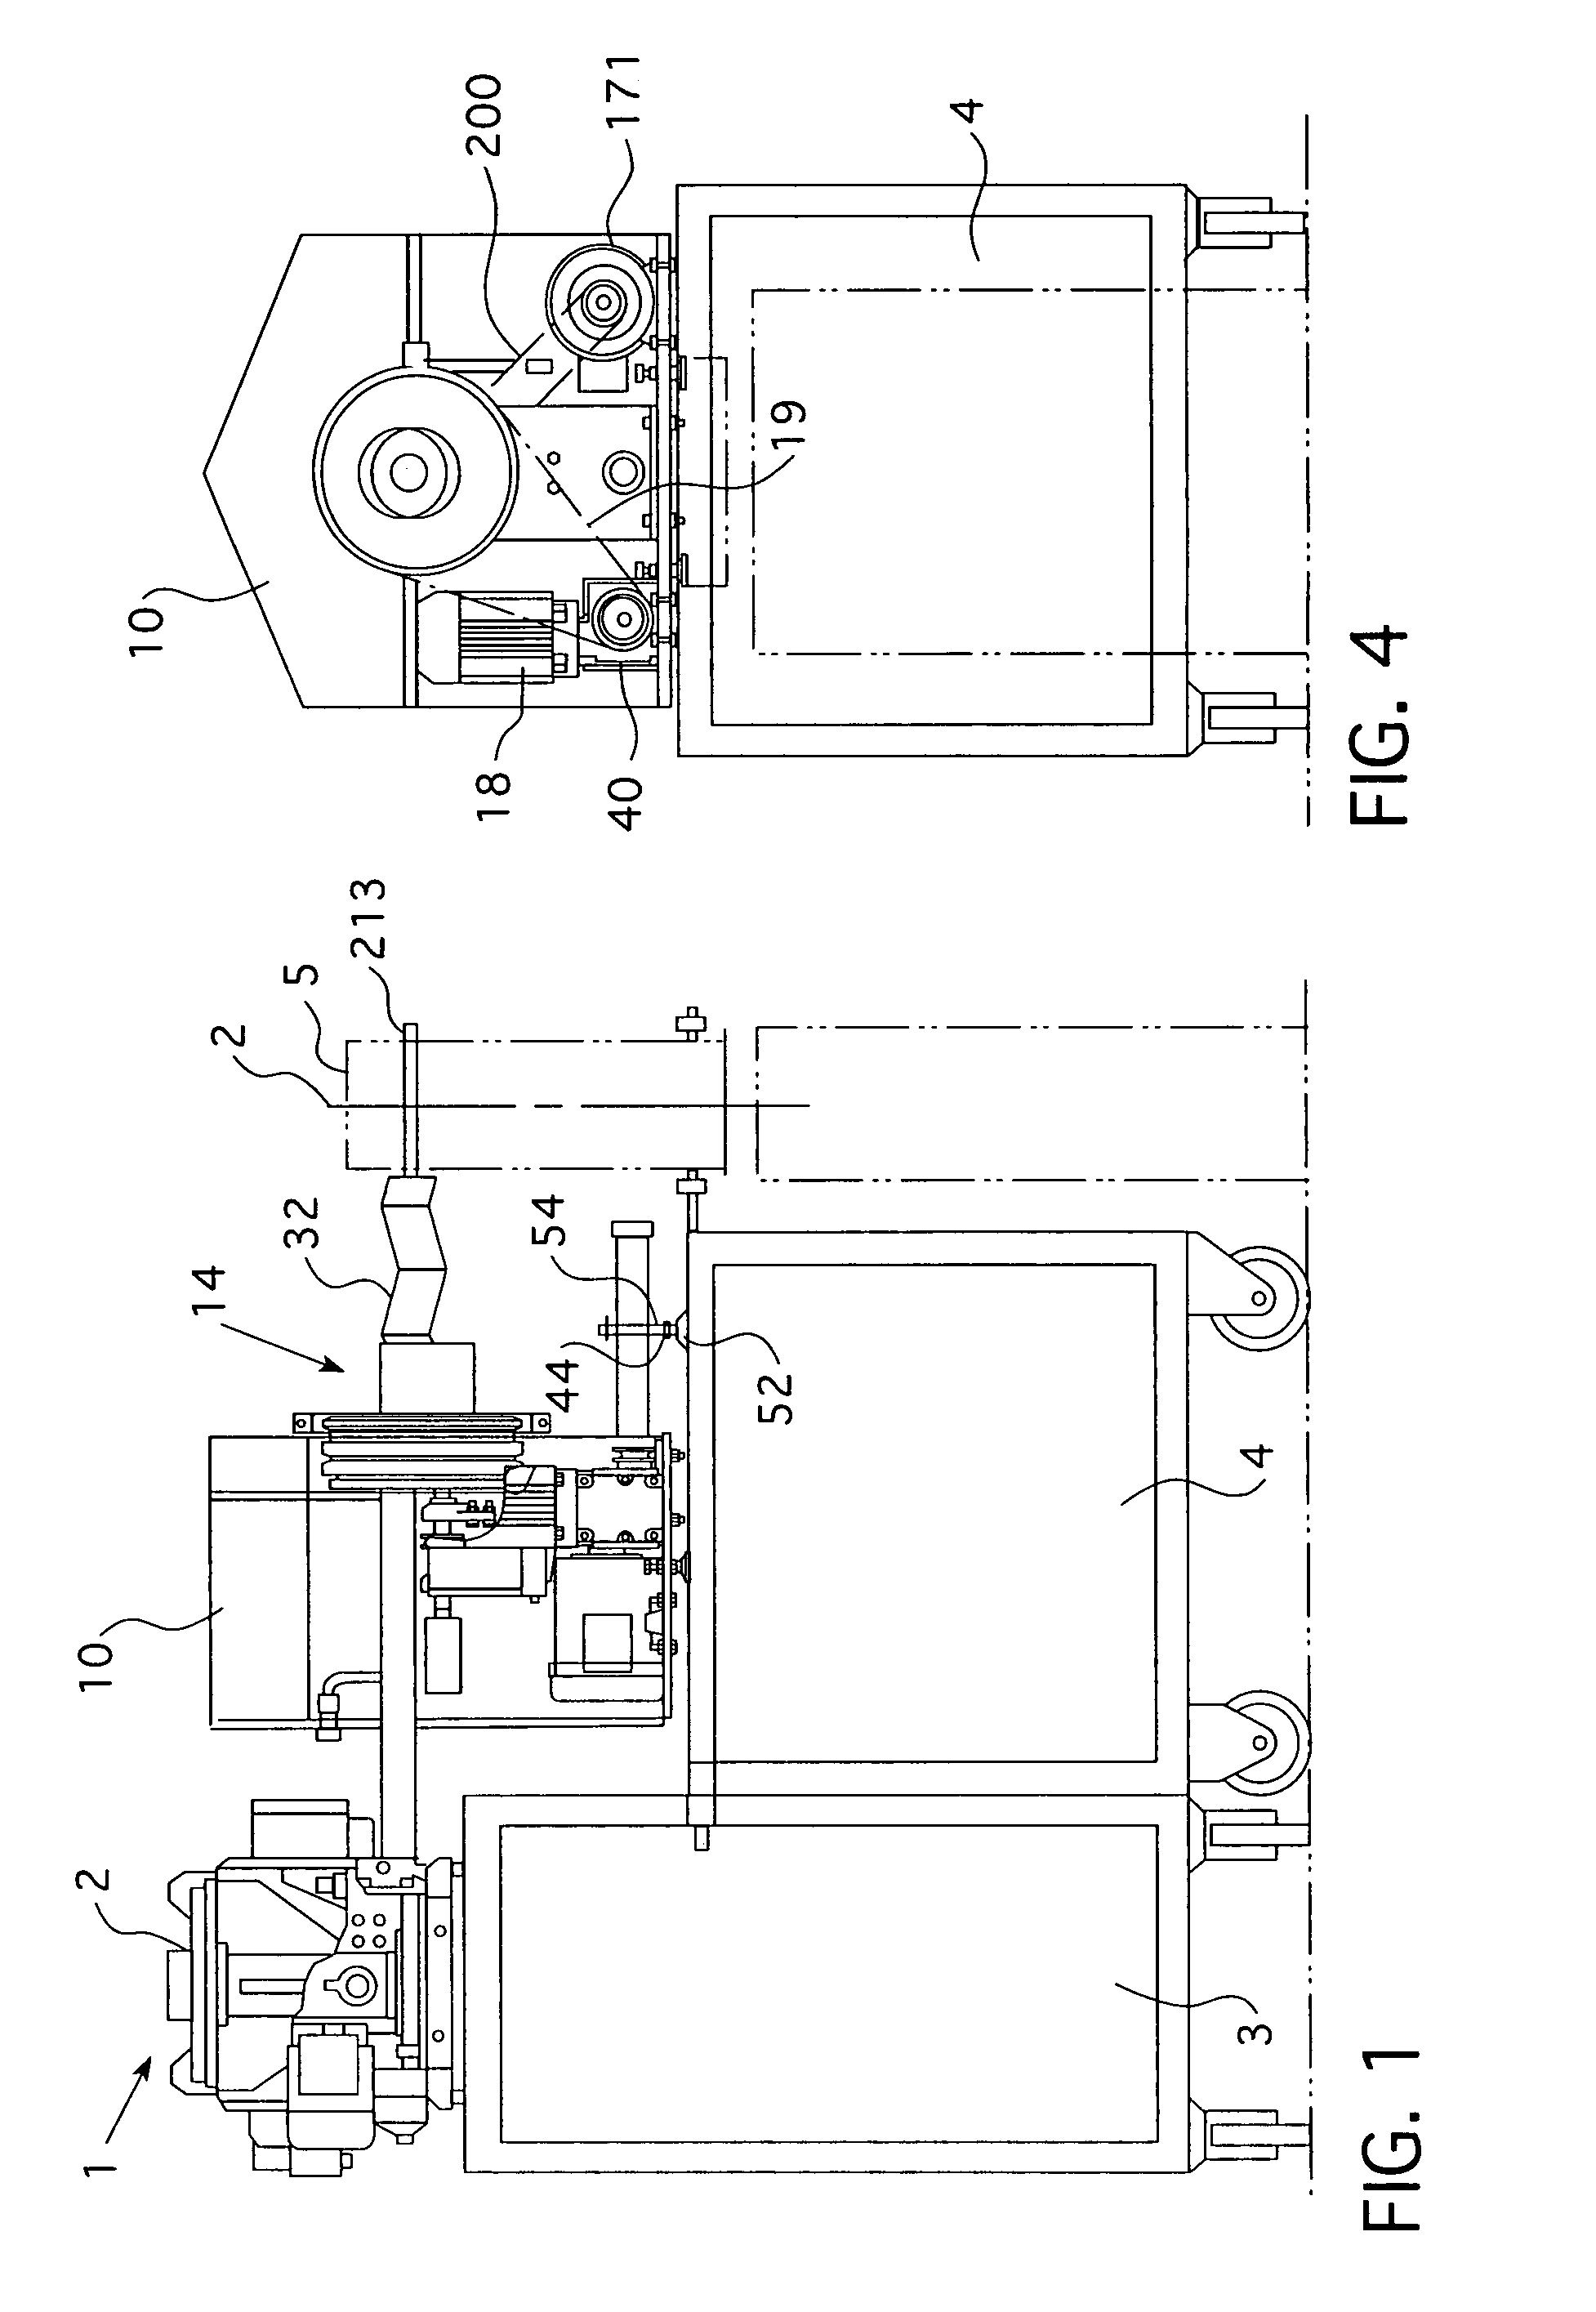 Apparatus for continuous blending